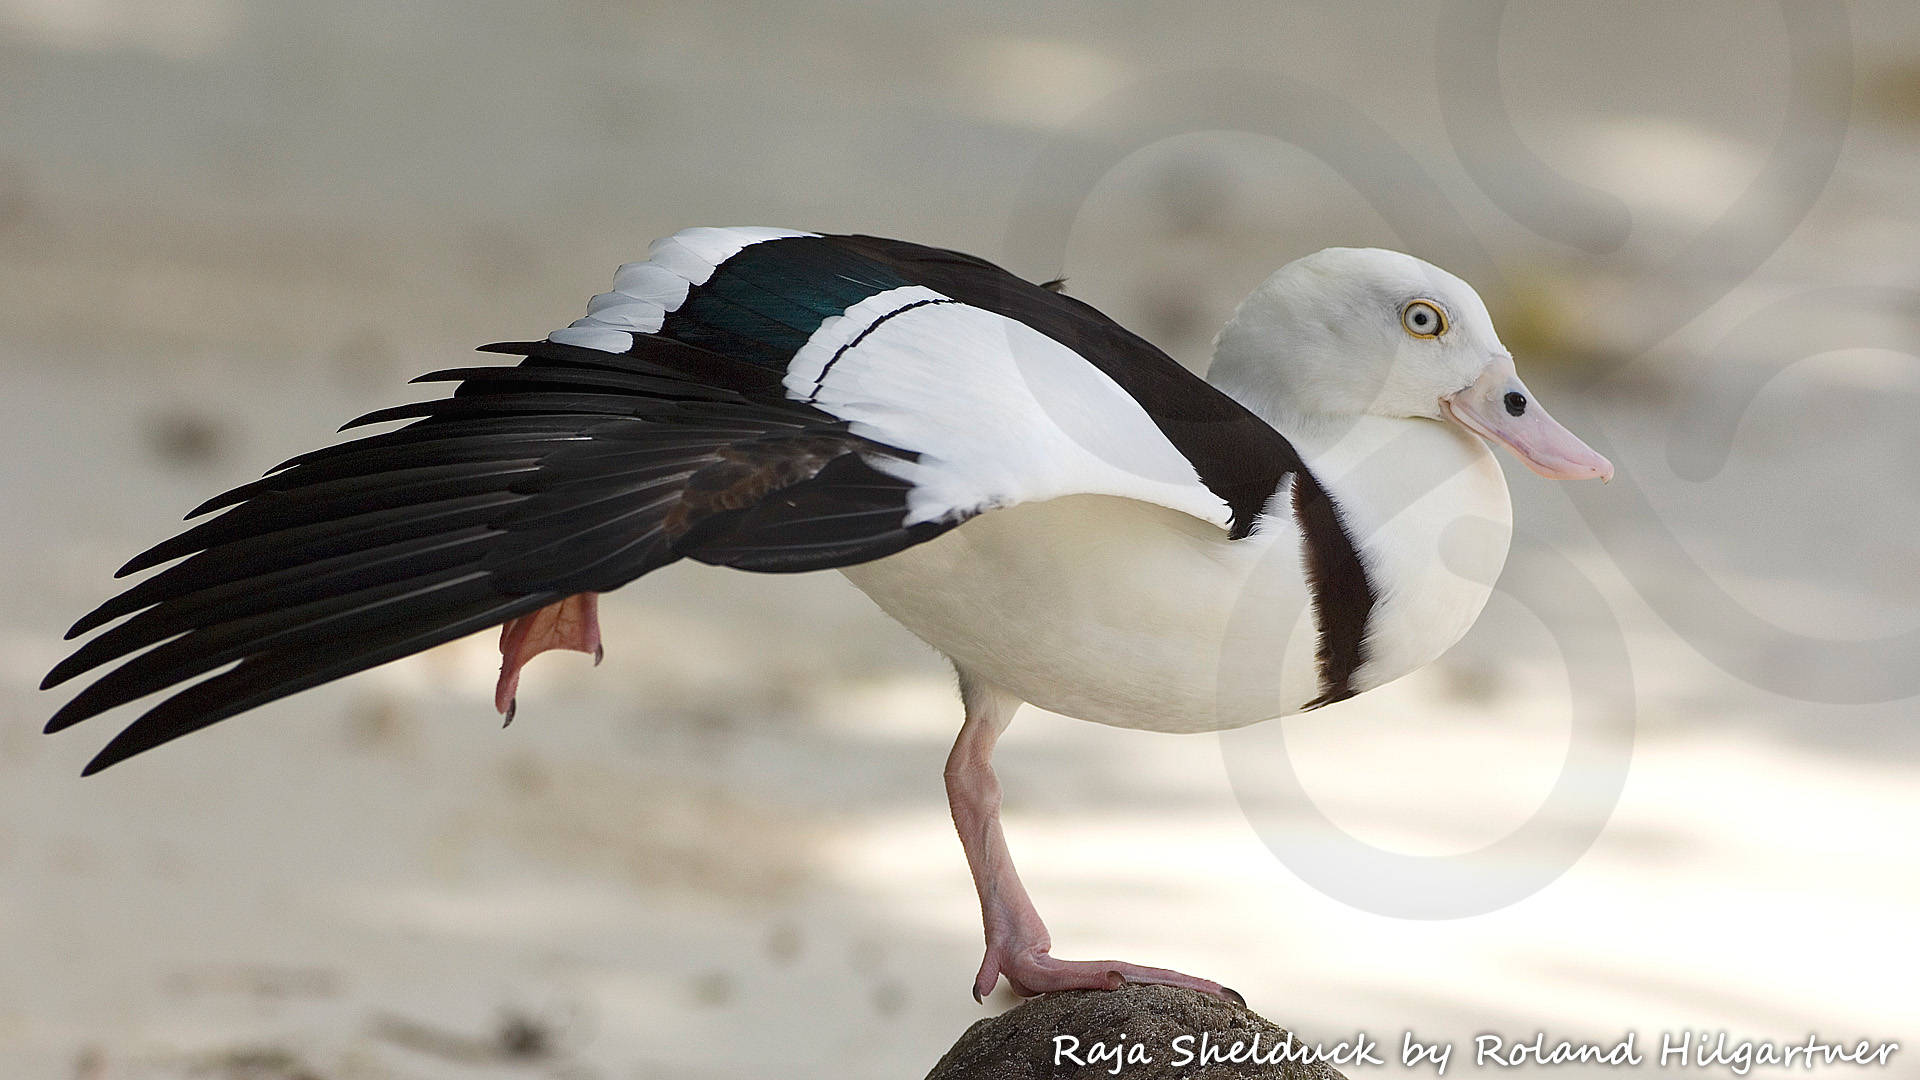 The Trans-Fly zone is a globally significant staging and wintering ground for waterfowl from Australia such as the Radjah Shelduck Radjah radjah. Copyright © Roland Hilgartner